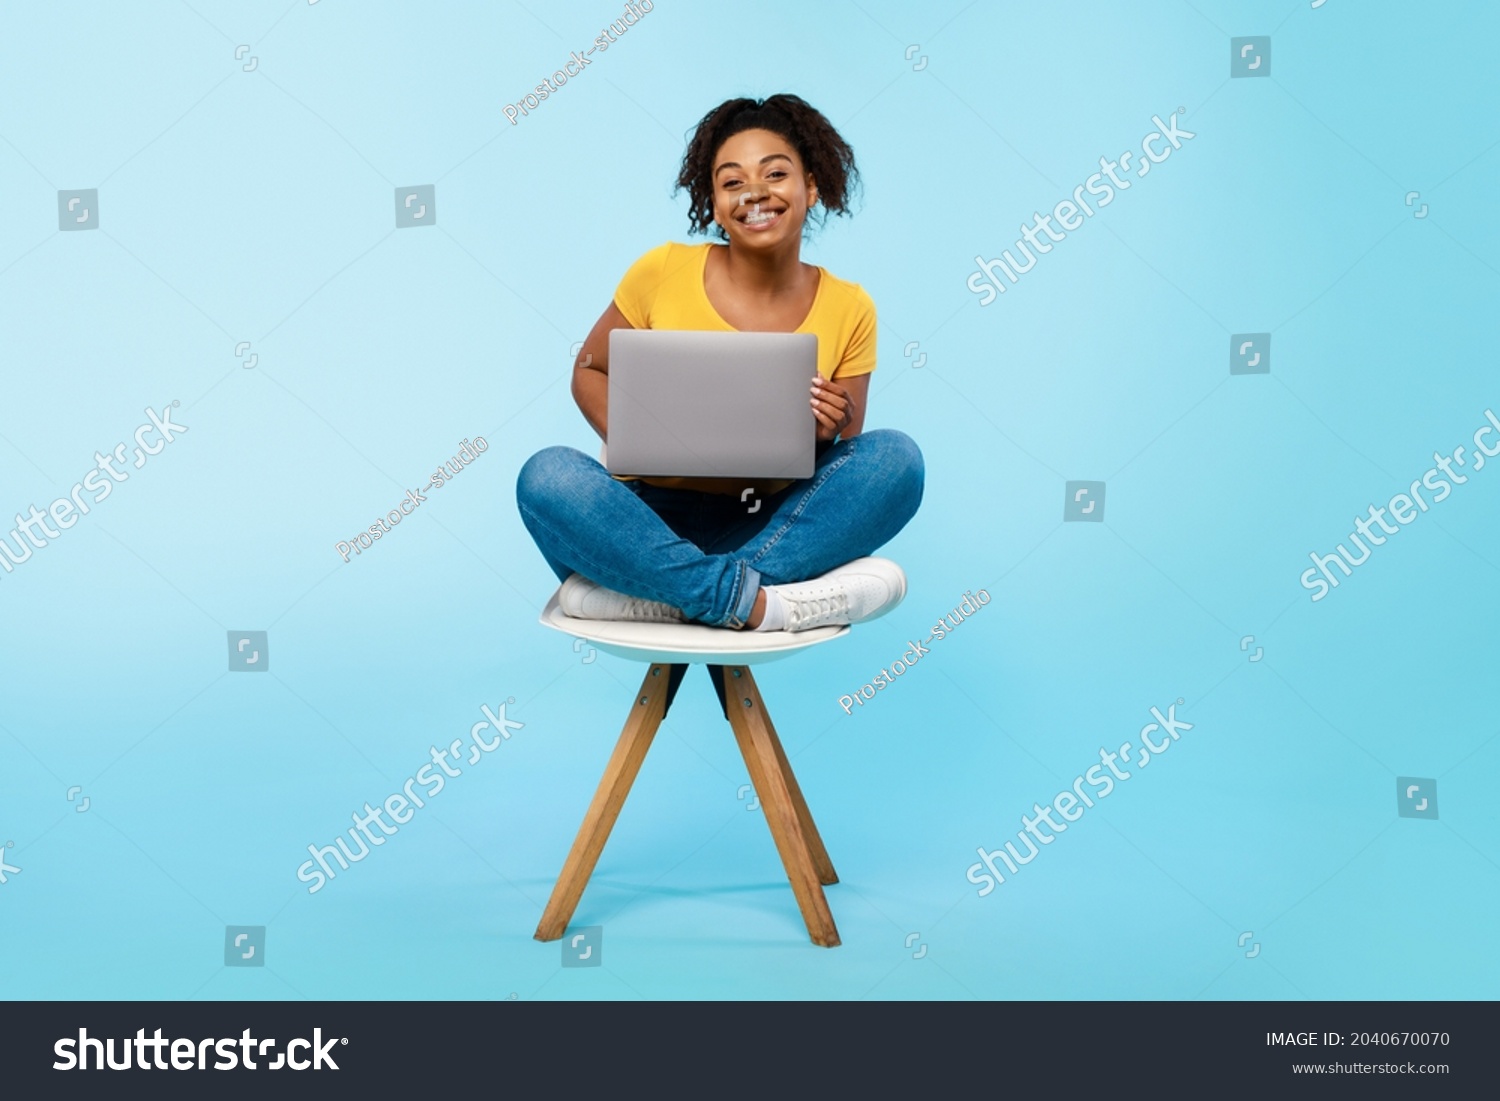 Cheery young black woman working online, sitting on chair and using laptop on blue studio background, full length. Cheerful African American lady surfing internet on portable pc #2040670070